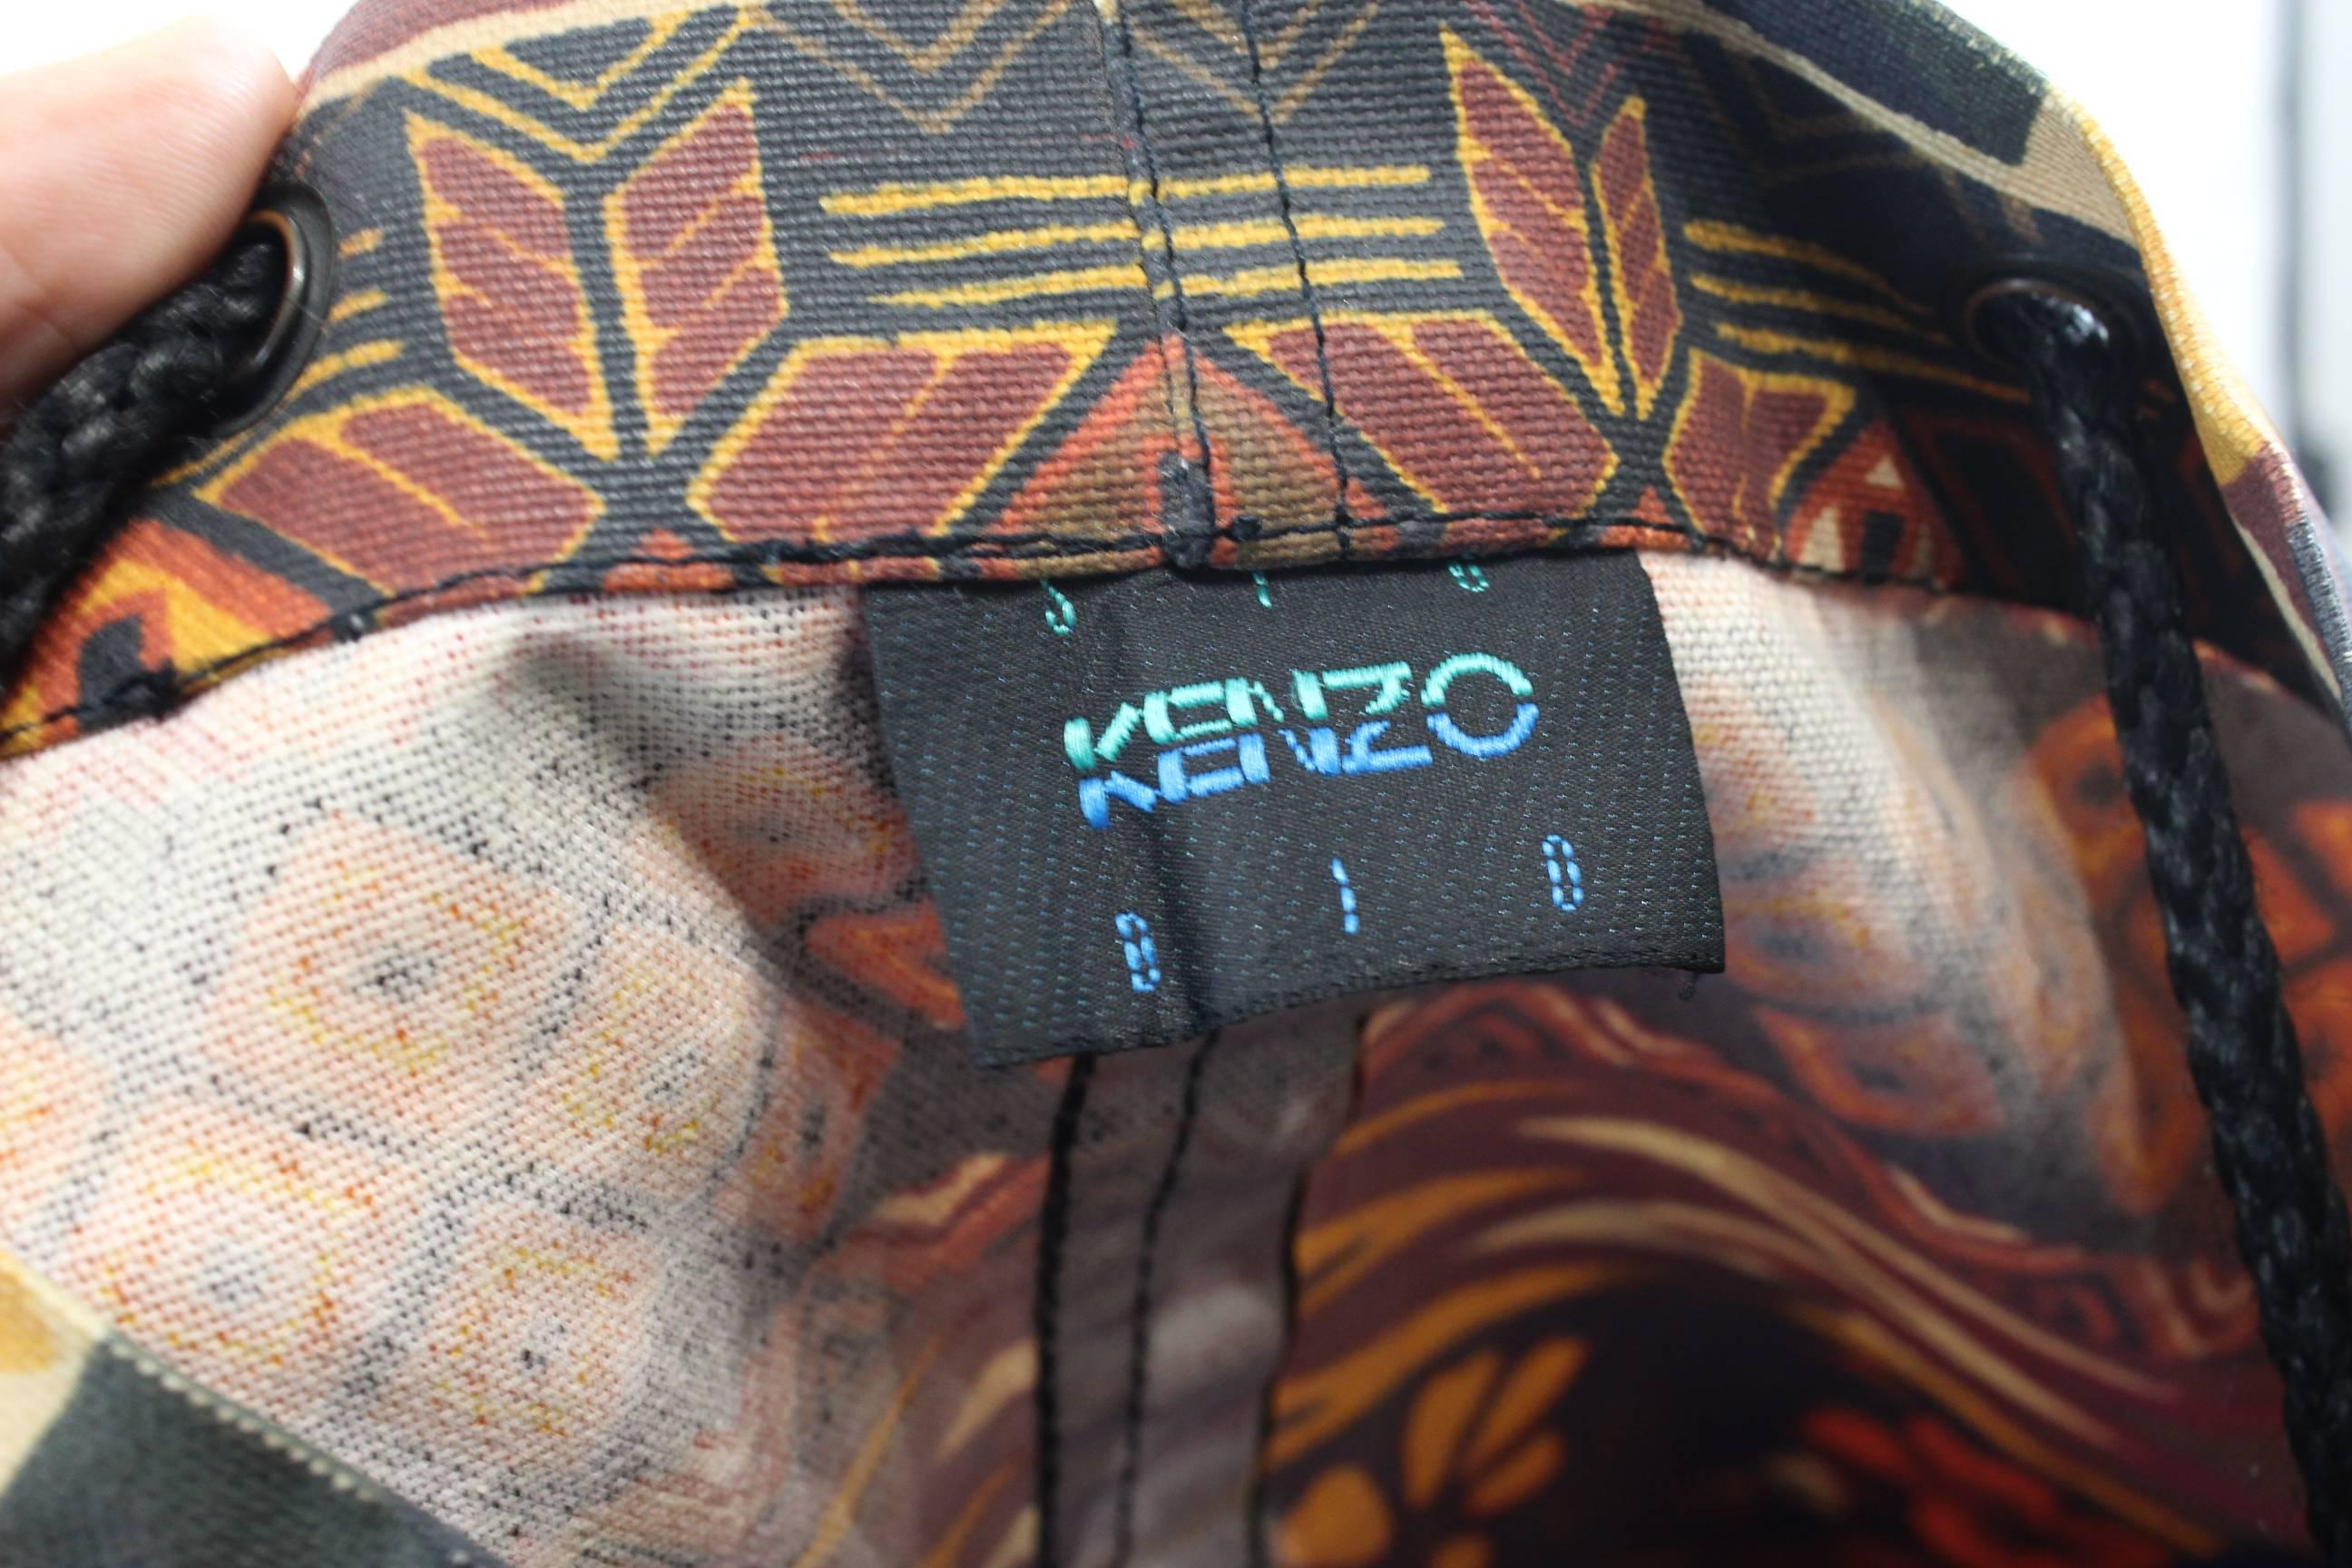 Colorful and super nice Kenzo Vintage Packback.

Big size 

Worn by one strand